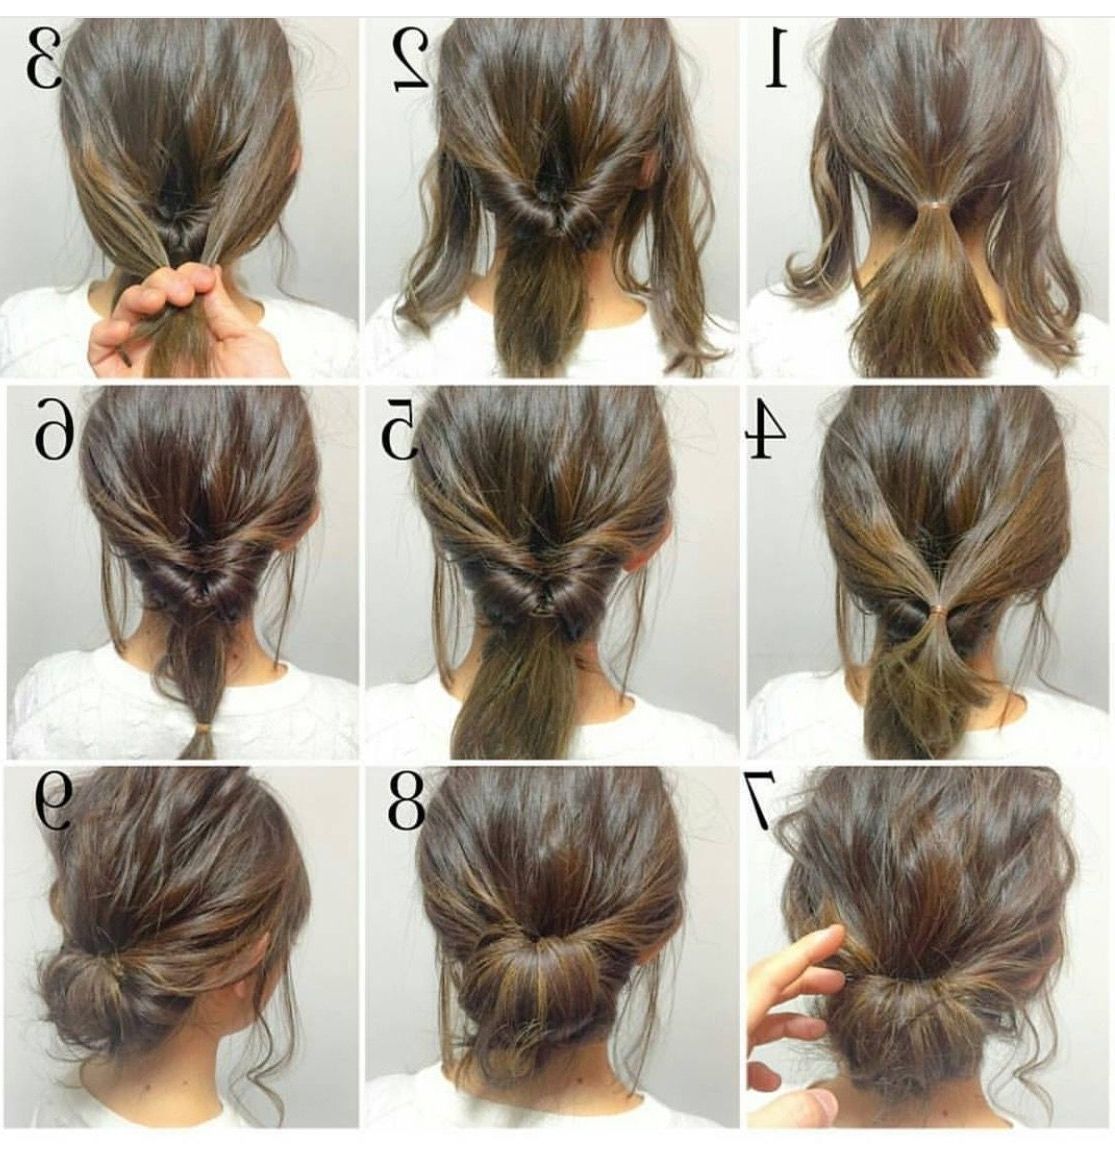 4 Messy Updos For Long Hair | Hairz | Pinterest | Updos, Hair Style With Fast Updos For Long Hair (View 1 of 15)